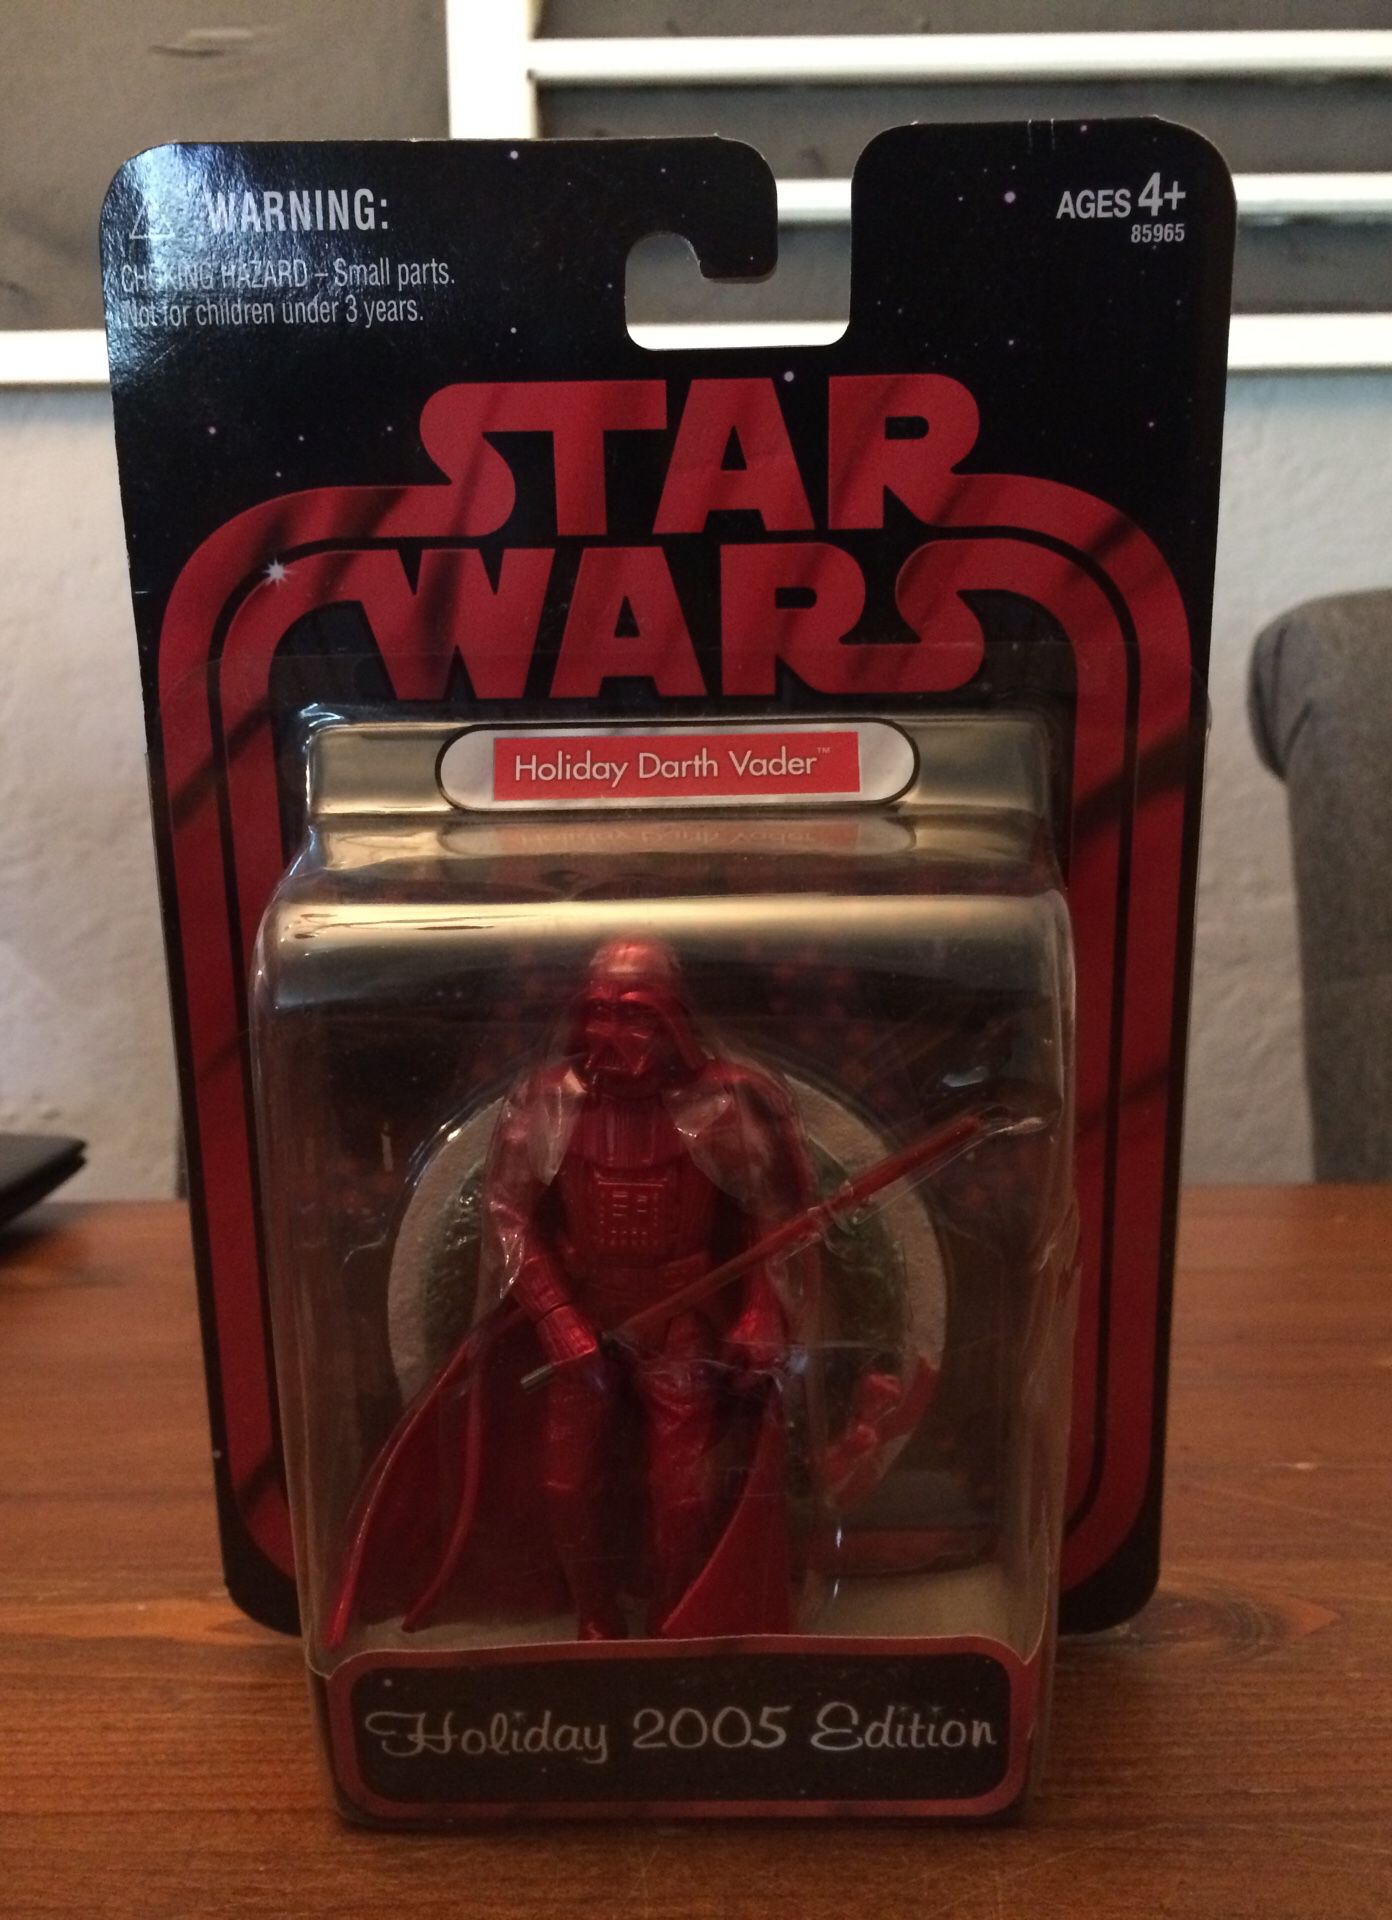 Star Wars Holiday 2005 Edition Darth Vader exclusive Christmas action figure